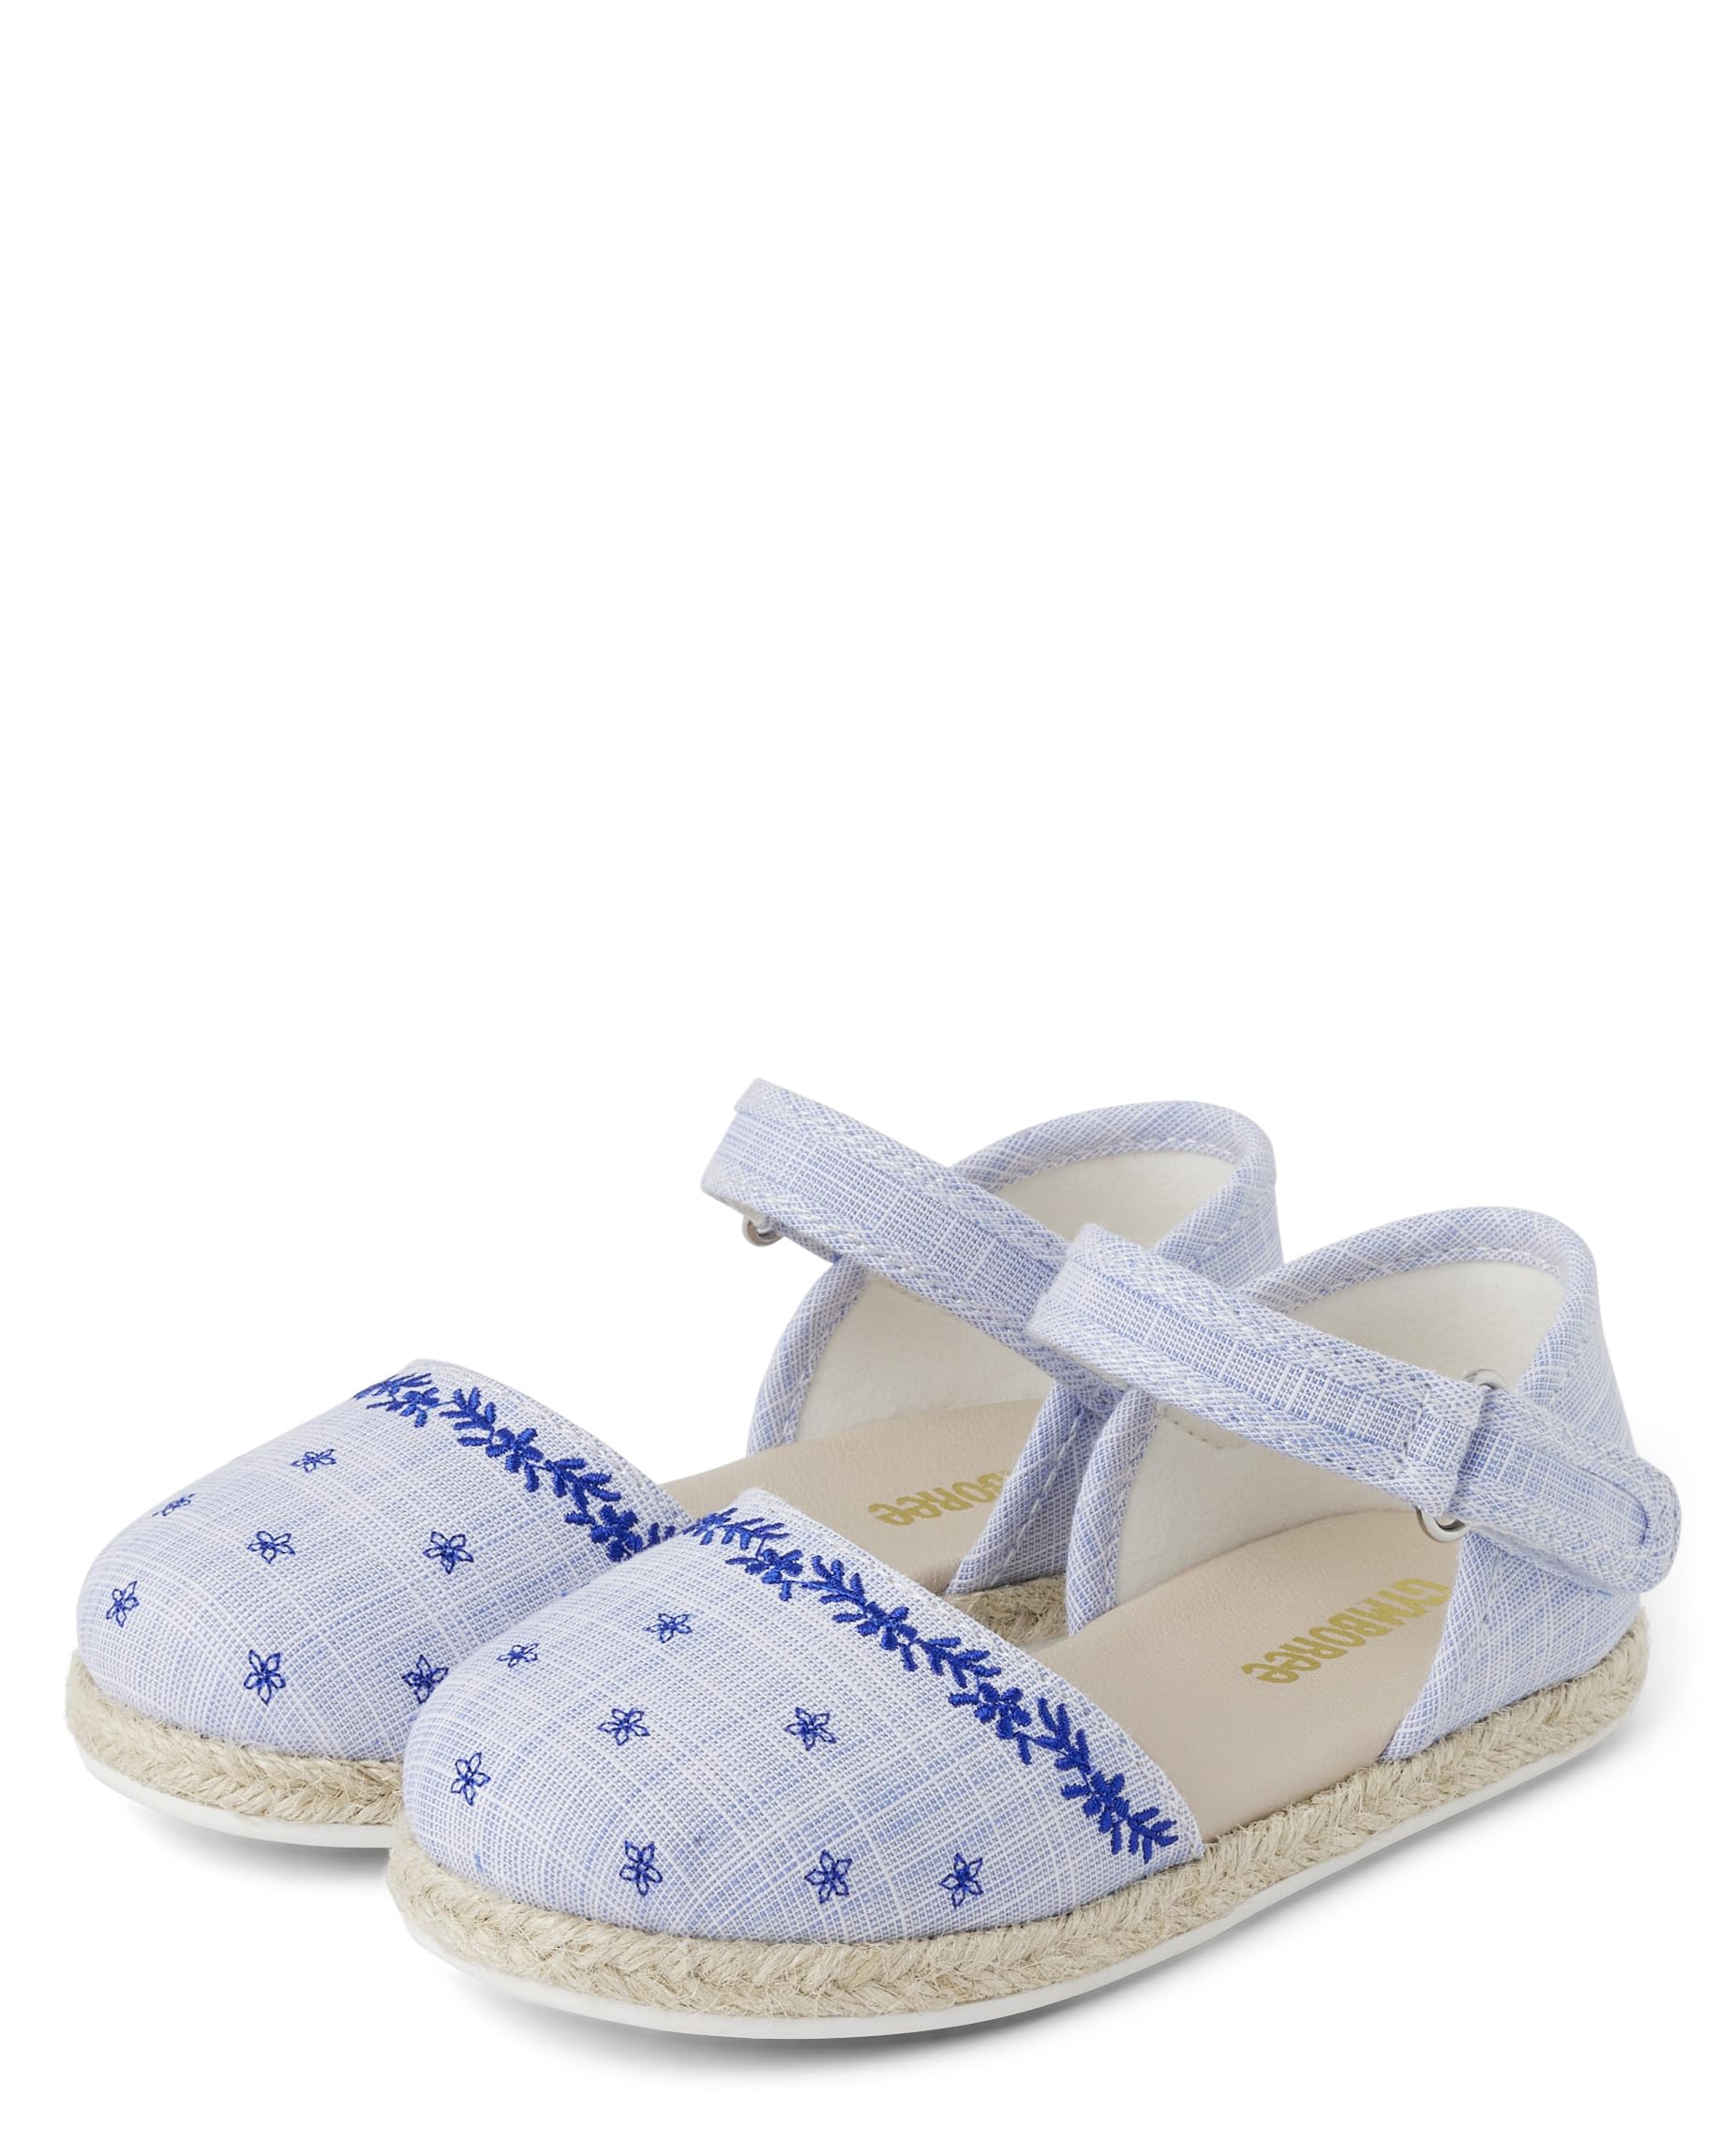 Gymboree Girl's and Toddler Slip on Casual Shoe Penny Loafer